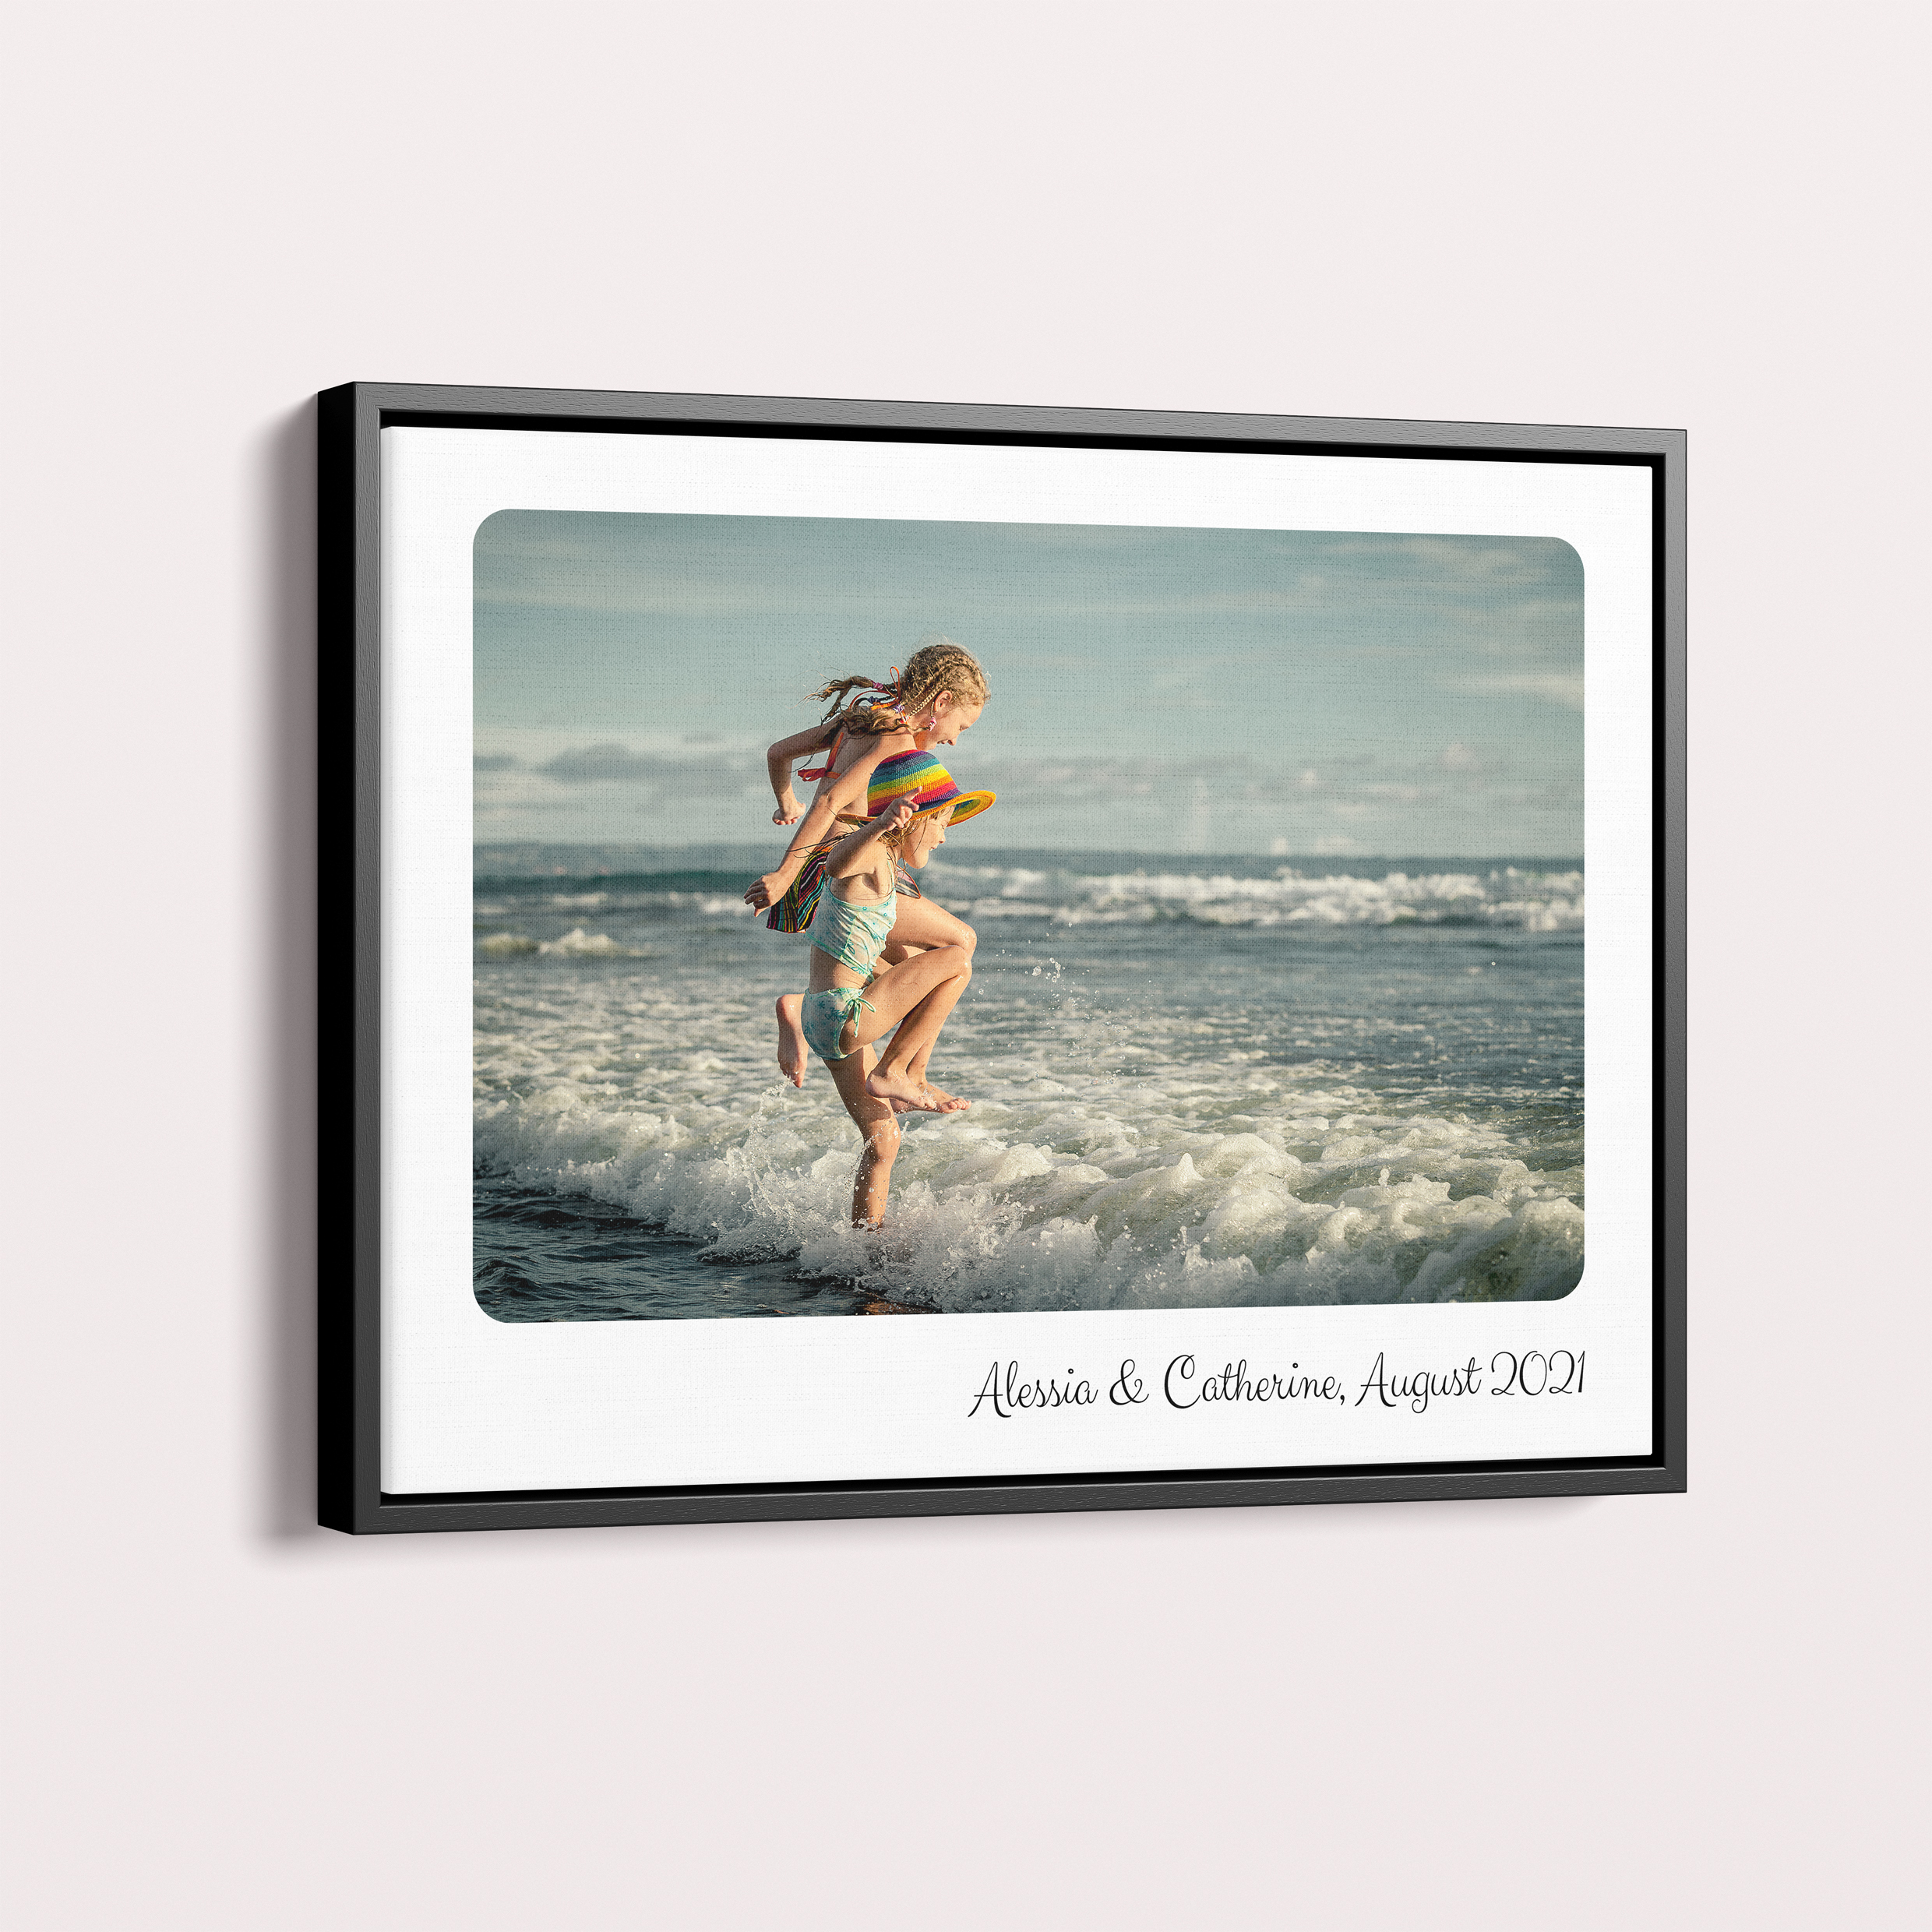 Curved Corners Framed Photo Canvases – Personalized Elegance for Your Memories